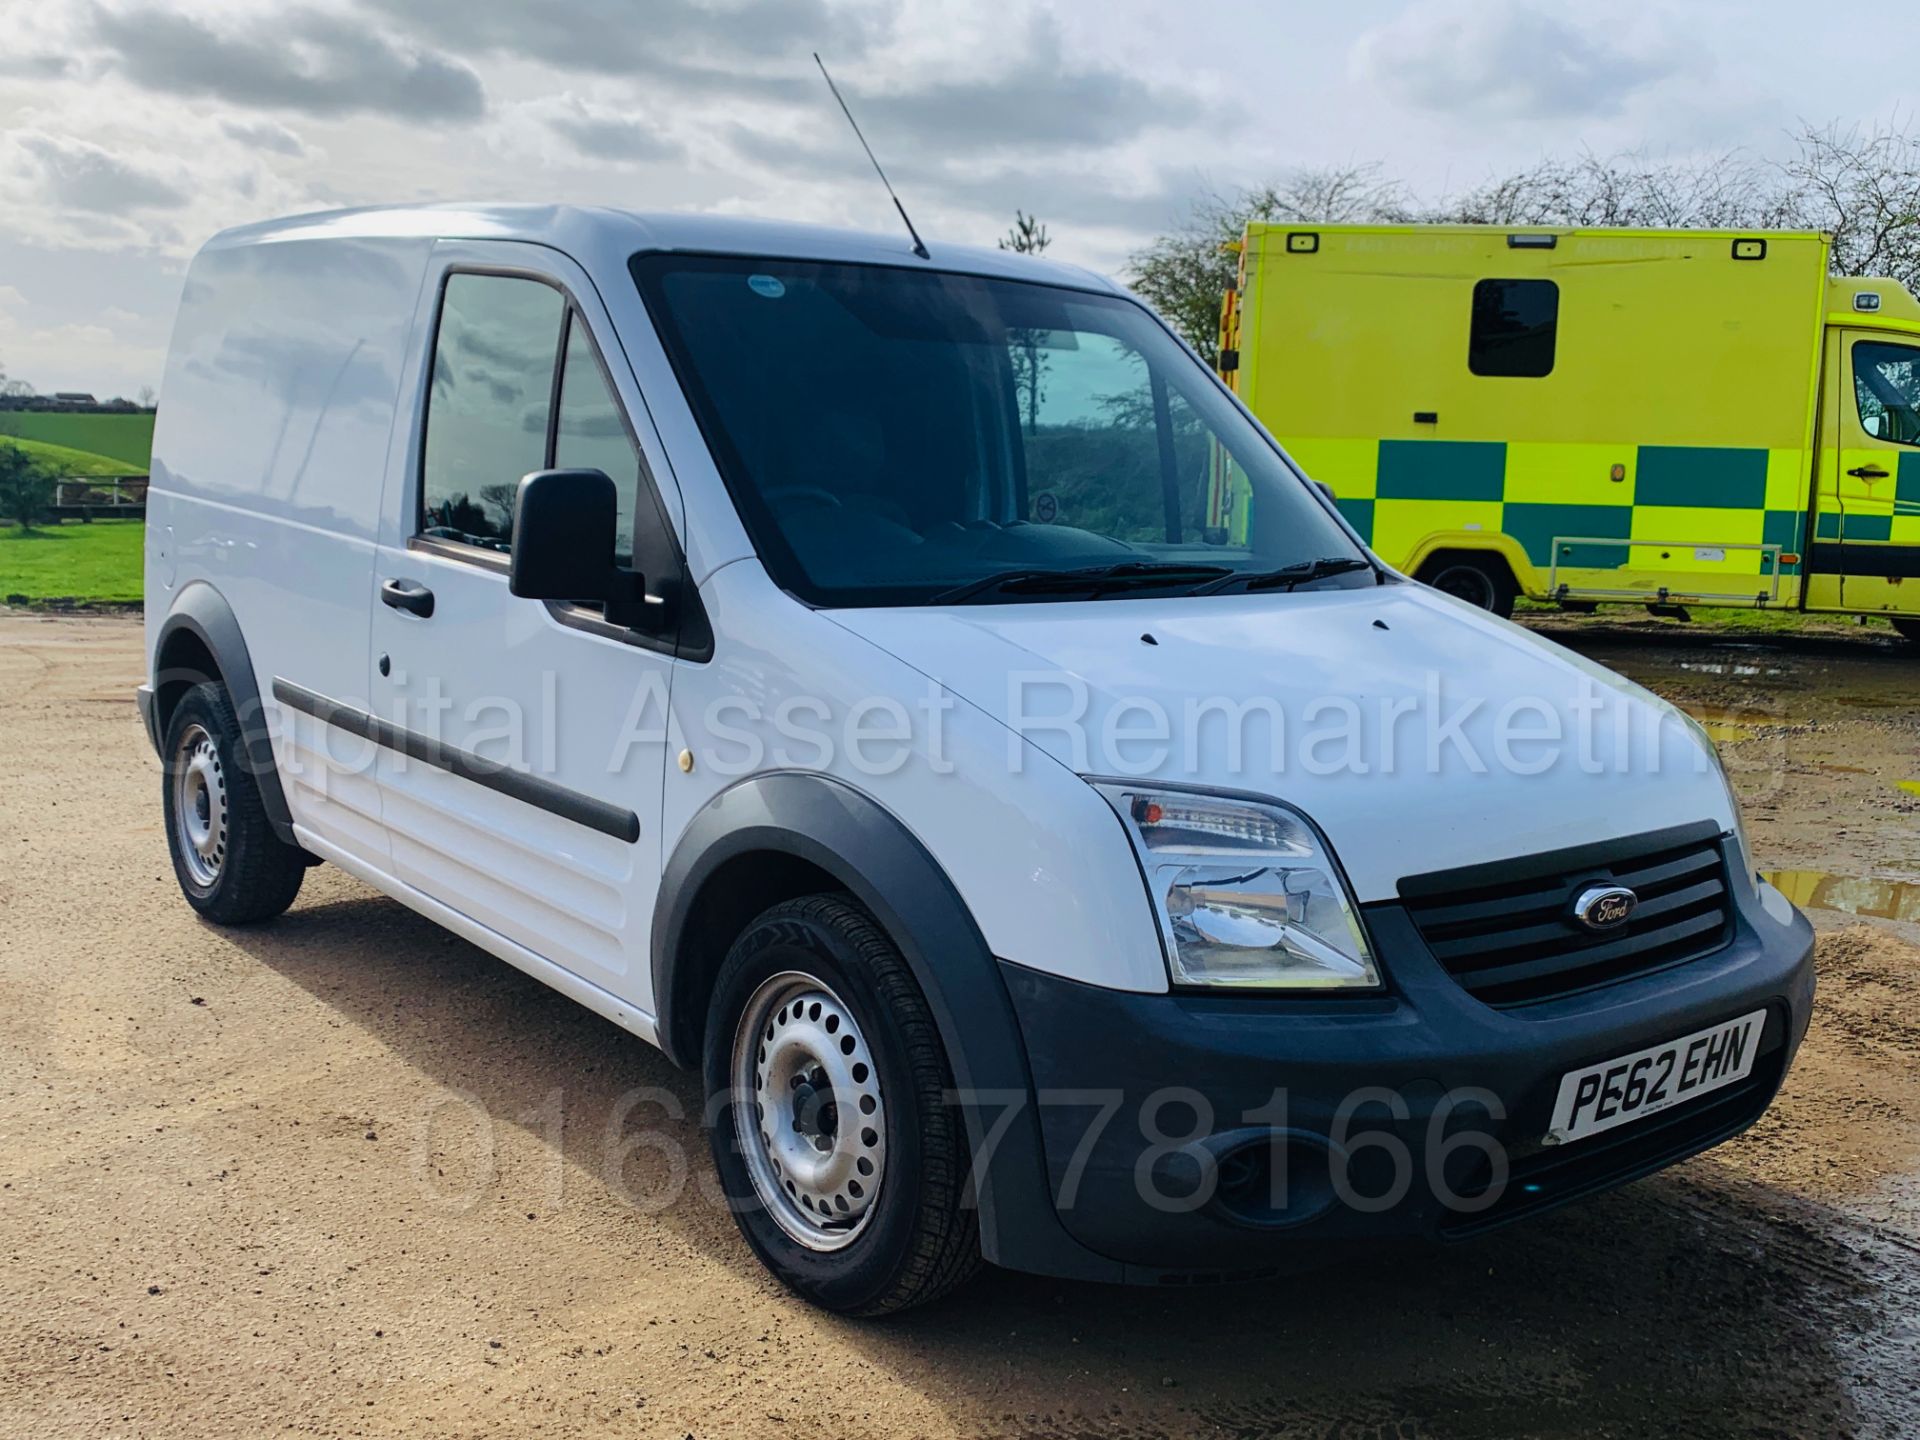 ON SALE FORD TRANSIT CONNECT T200 *LCV - PANEL VAN* (2013 MODEL) '1.8 TDCI -*LOW MILES - Image 11 of 30